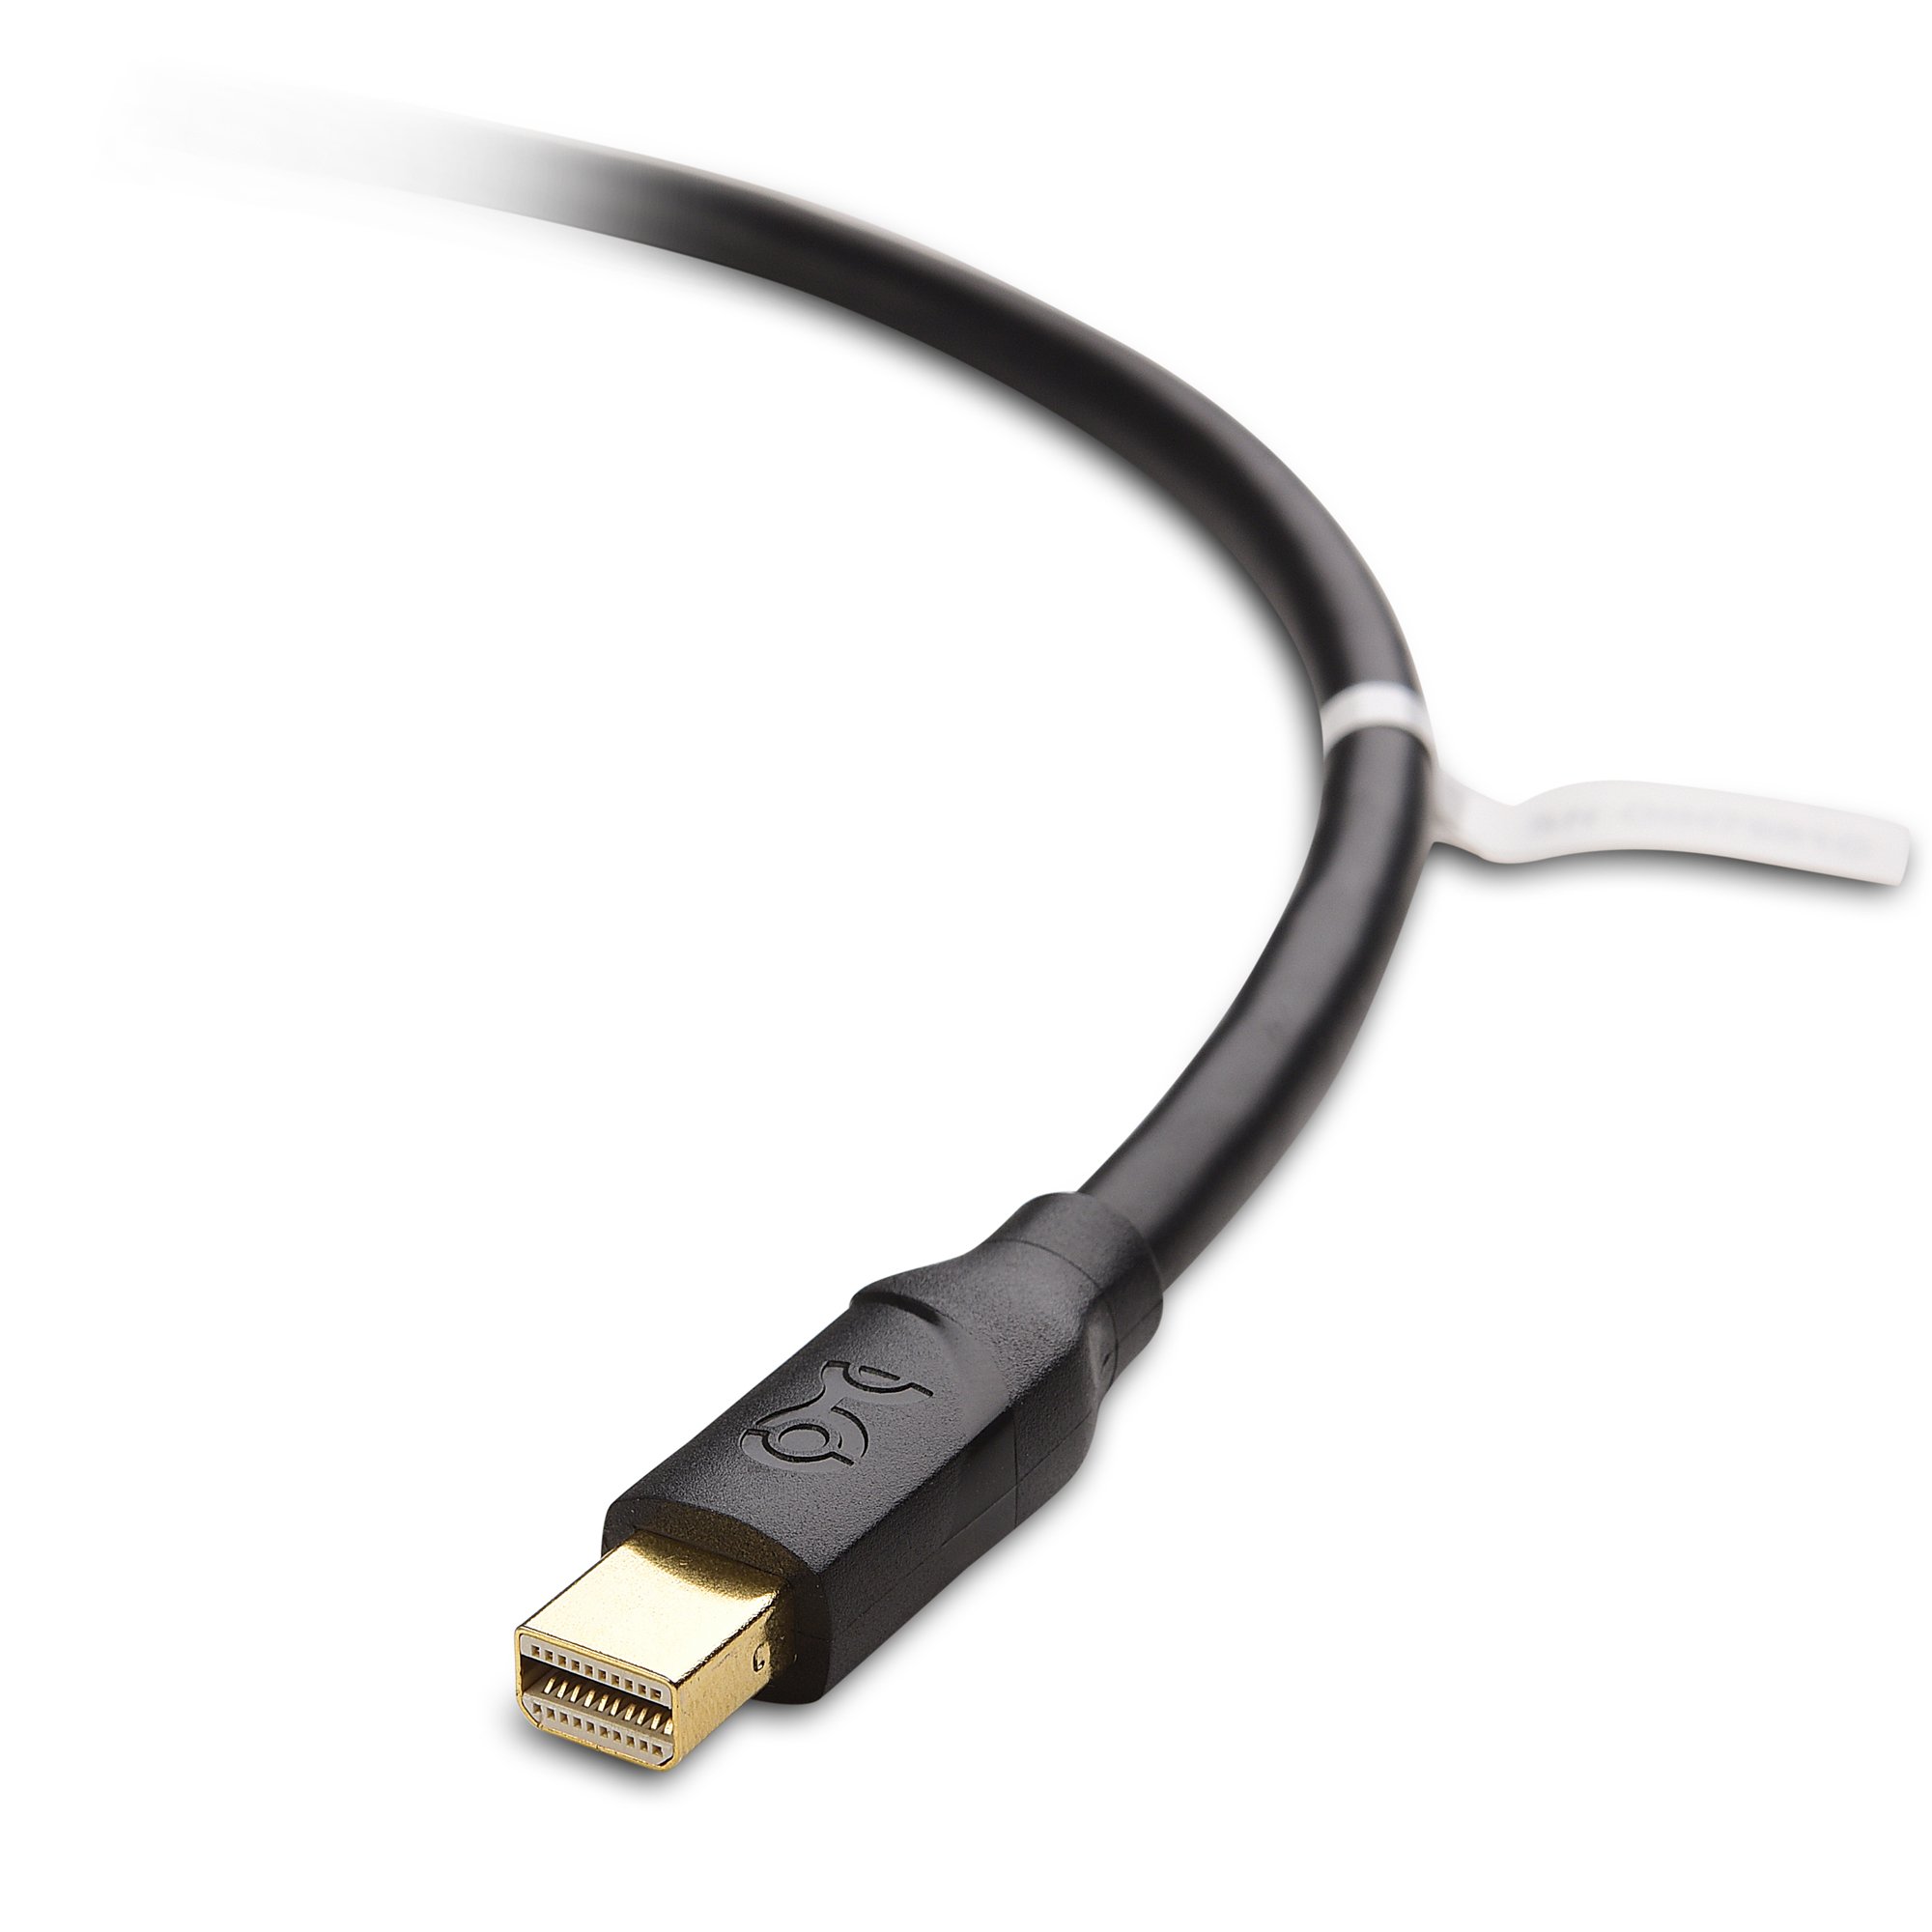 Cable Matters 4K Mini DisplayPort to Mini DisplayPort Cable in Black 6 Feet - Not a Replacement for Thunderbolt Cable, Not Compatible with iMac, Not Support Target Display Mode